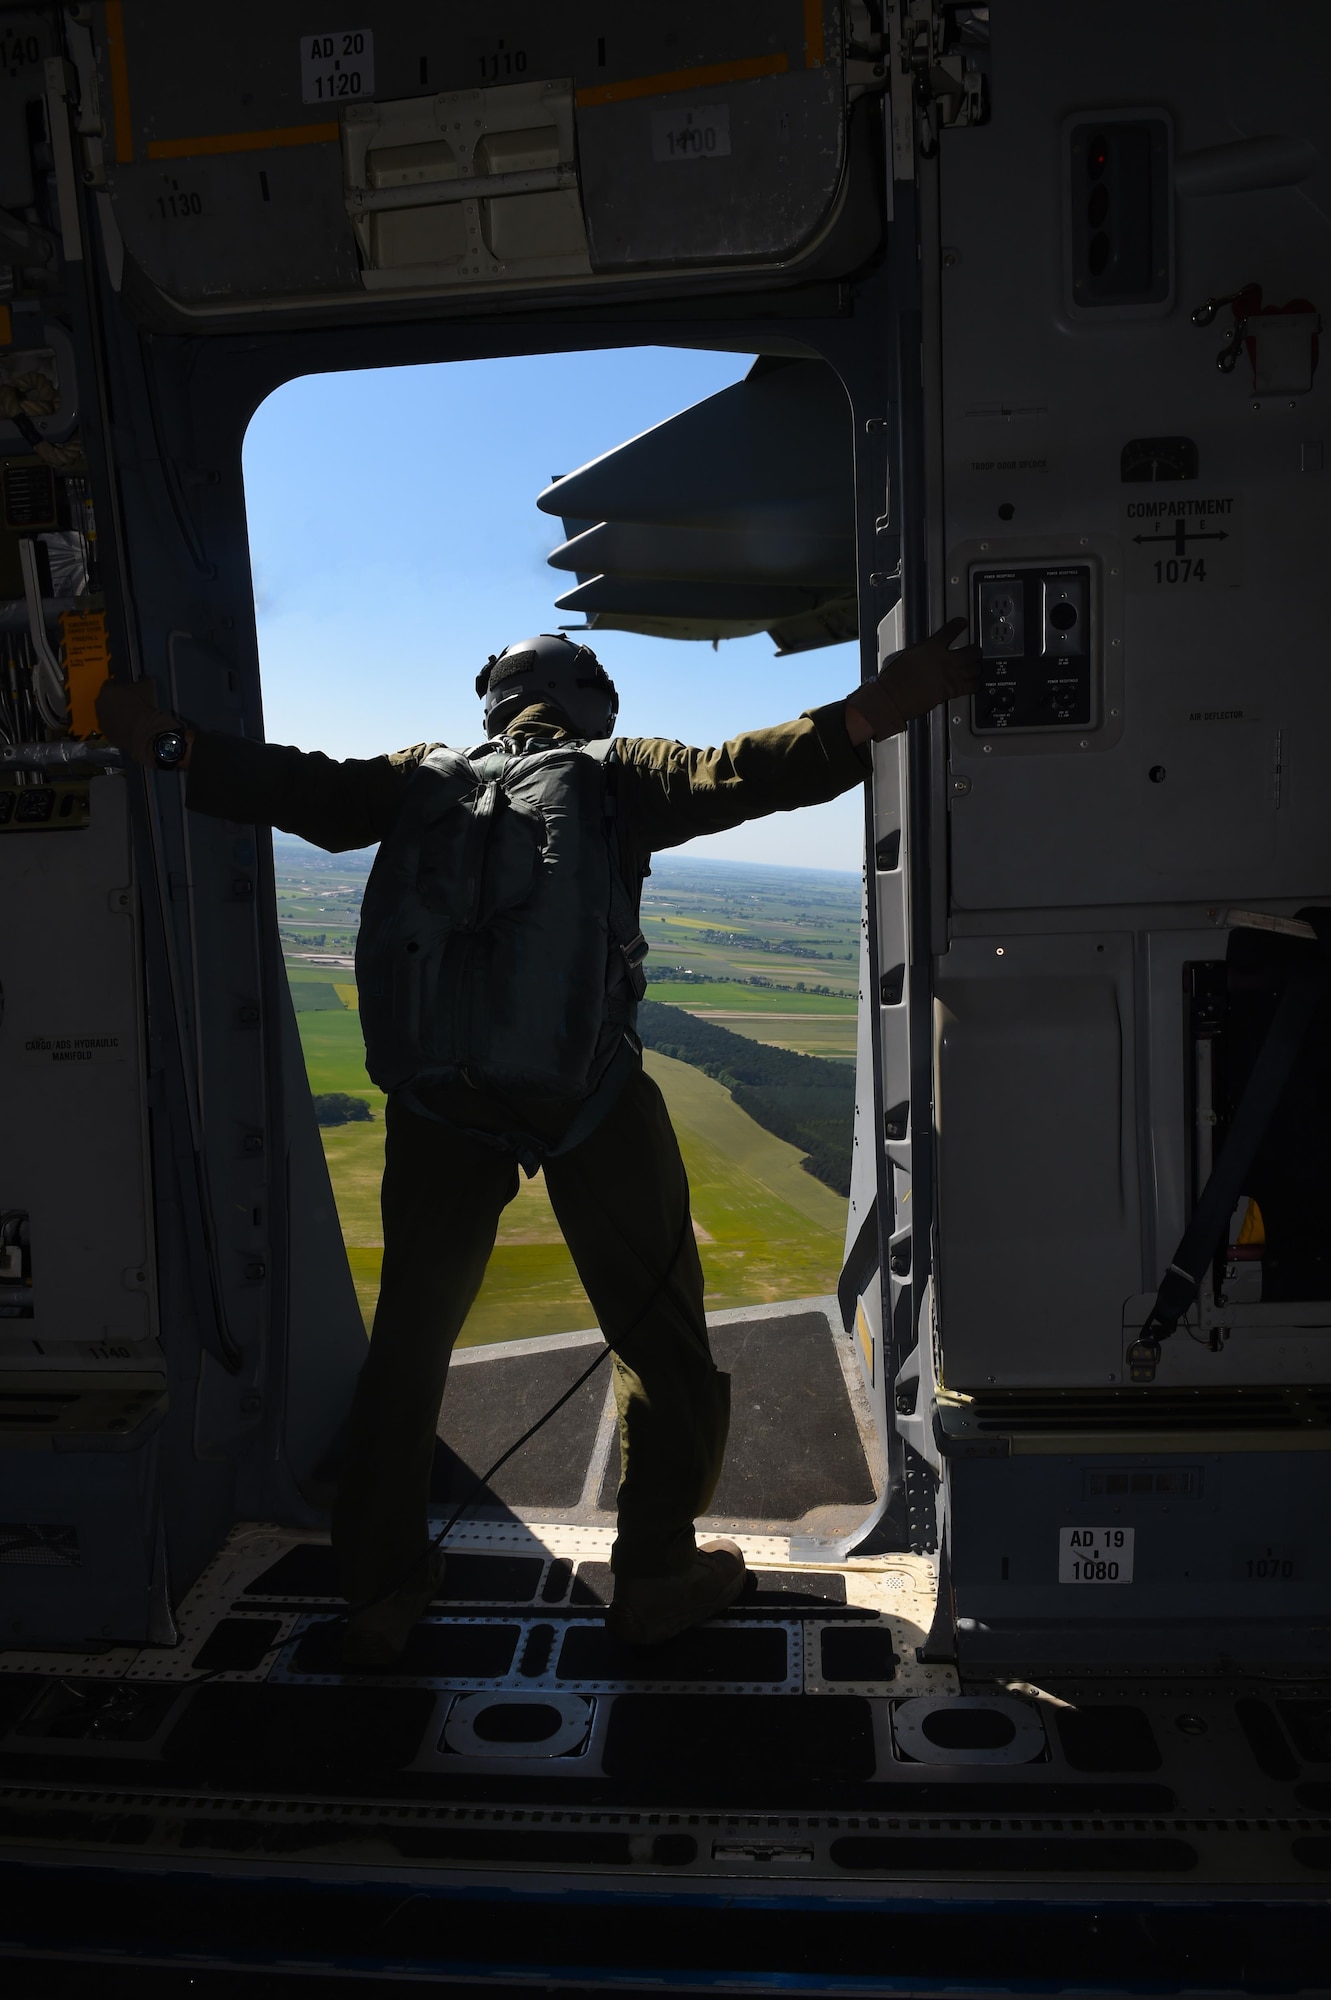 Tech. Sgt. Paul Mooney, 8th Airlift Squadron C-17 Globemaster III loadmaster, looks over the drop zone in Poland June 6, 2016. Mooney was part of one of the three 62nd Airlift Wing’s units participating in Exercise Swift Response 2016. Mooney loaded and secured a C-17 with equipment and personnel for air drop operations. (Air Force photo/Staff Sgt. Naomi Shipley)